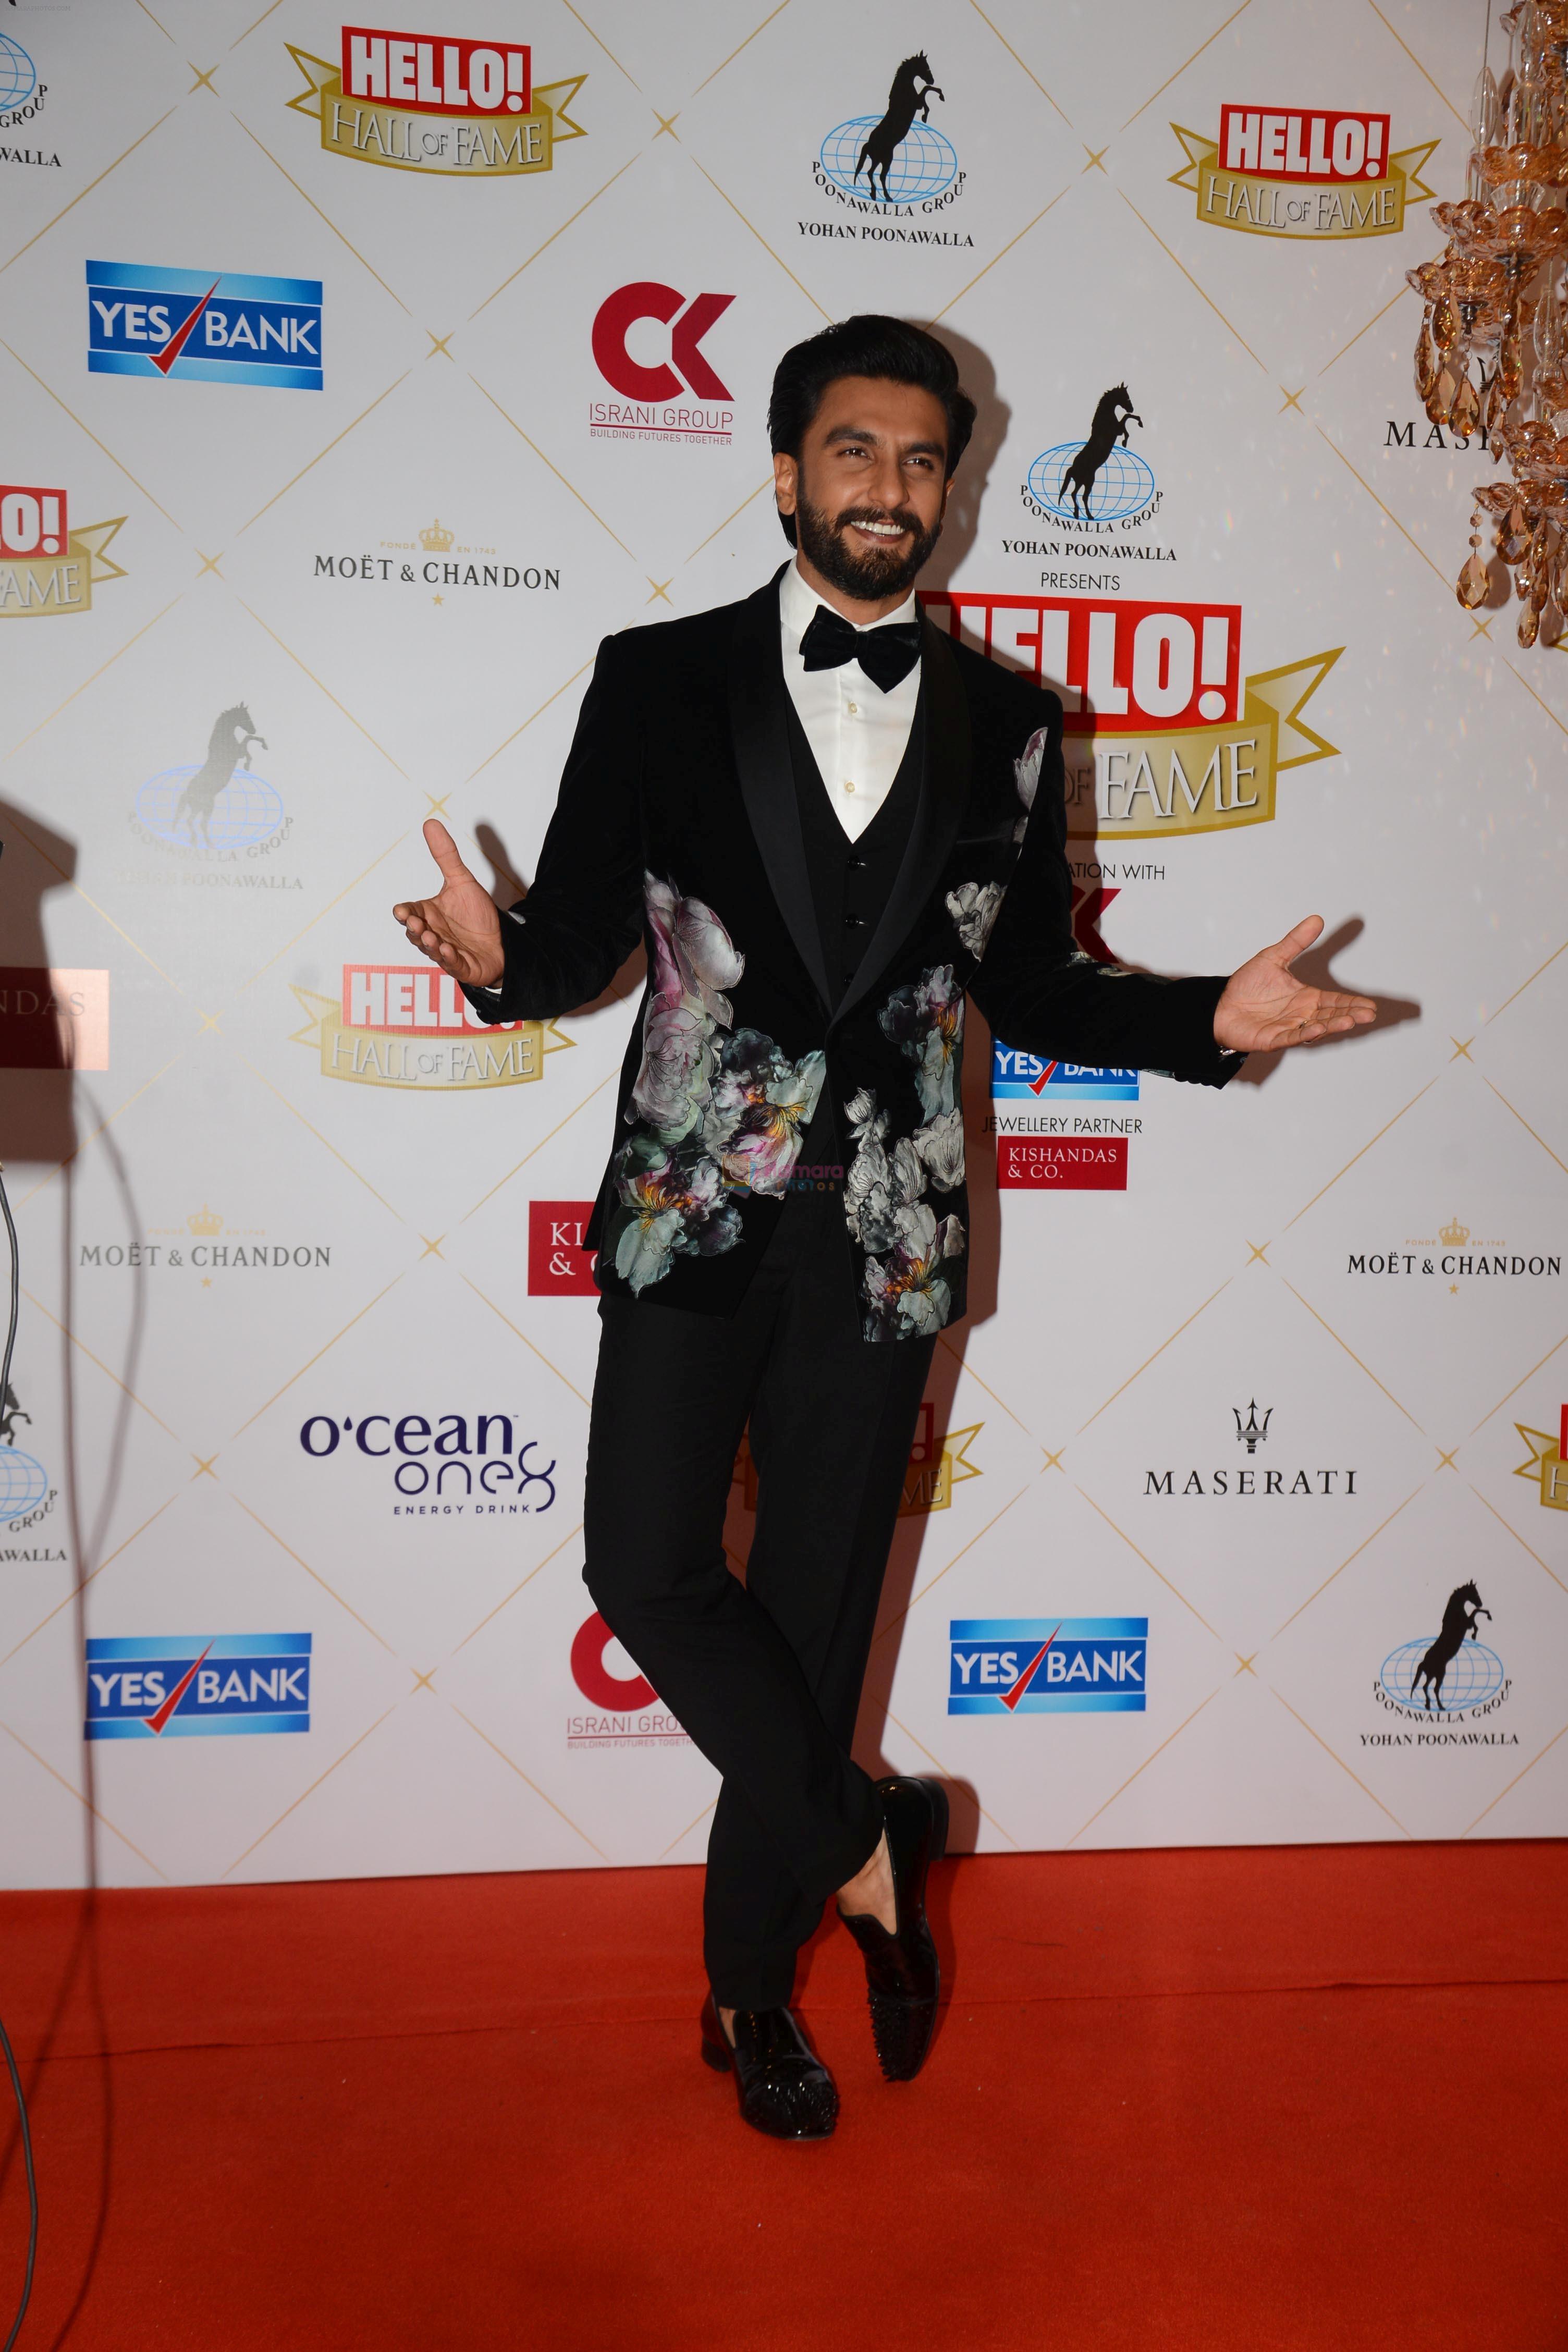 Ranveer Singh at the Hello Hall of Fame Awards in St Regis hotel on 18th March 2019